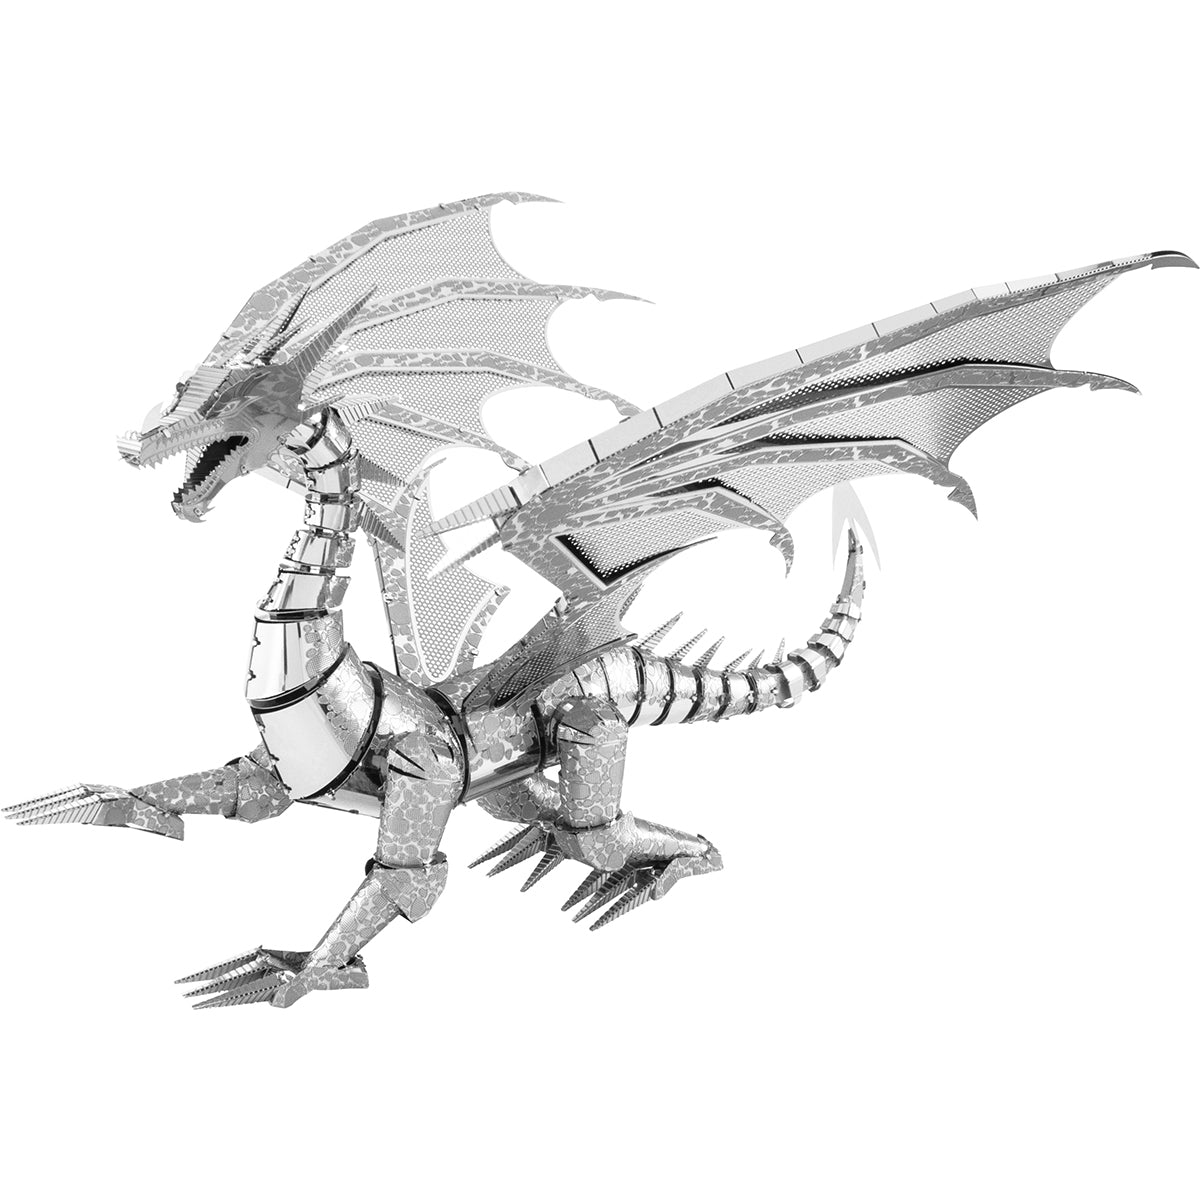 Silver Dragon 3D Model Kit - Premium Series Metal Earth gift puzzle puzzle